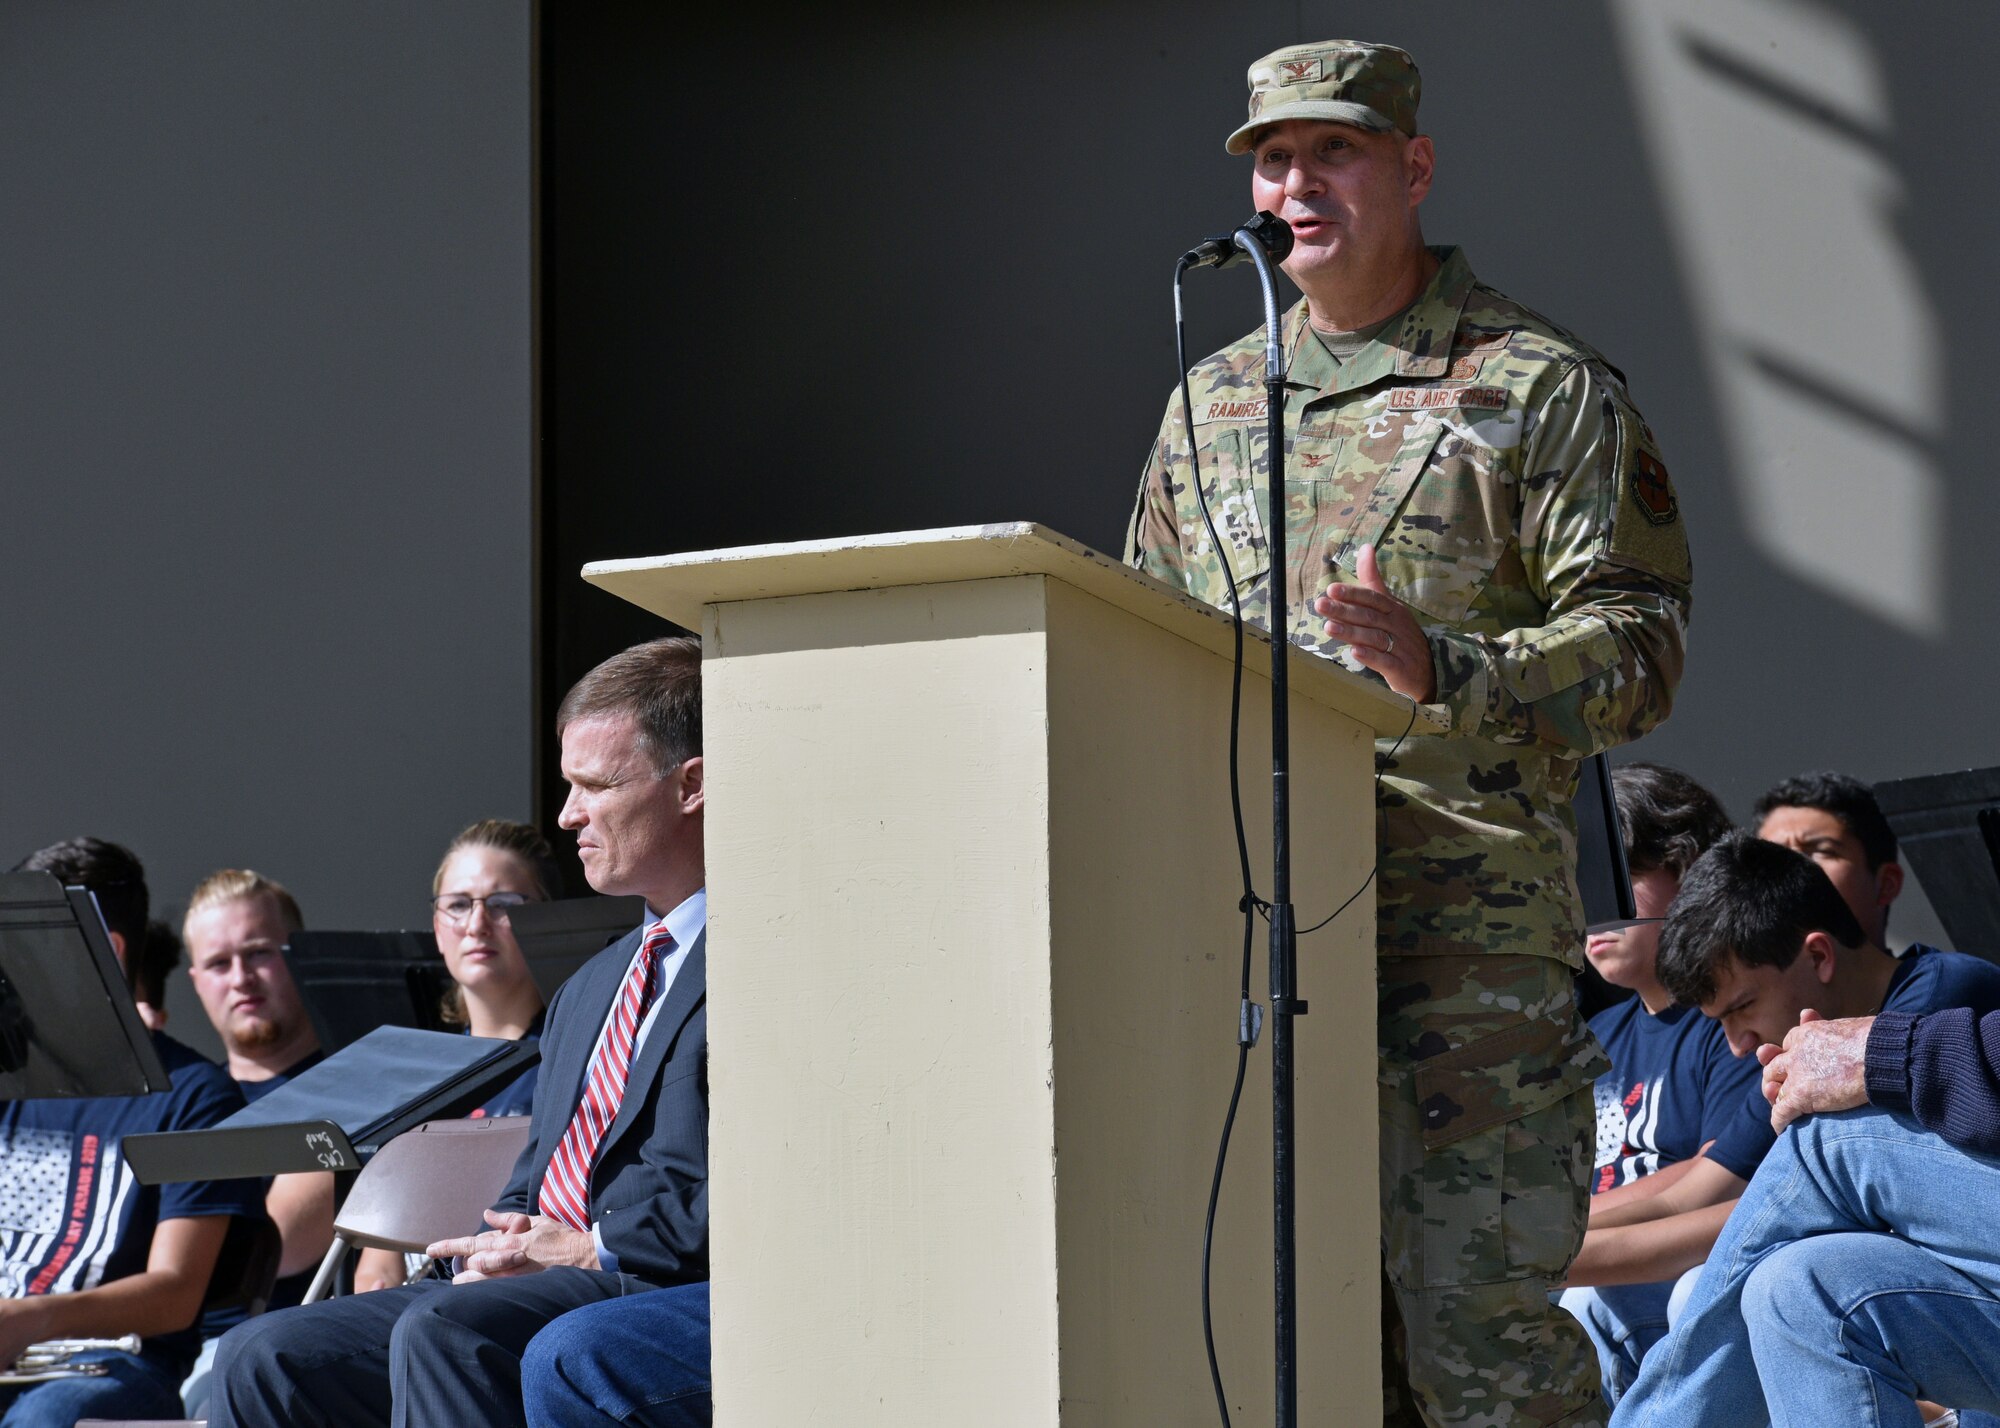 U.S. Air Force Col. Robert Ramirez, 17th Training Wing vice commander, speaks during the San Angelo Support for Veterans Honor Ceremony at the Bill Aylor Sr. Memorial Riverstage in San Angelo, Texas, Dec. 5, 2019. Wounded military veterans were honored for their service with a weekend hunting trip and various community events. (U.S. Air Force photo by Airman 1st Class Robyn Hunsinger)